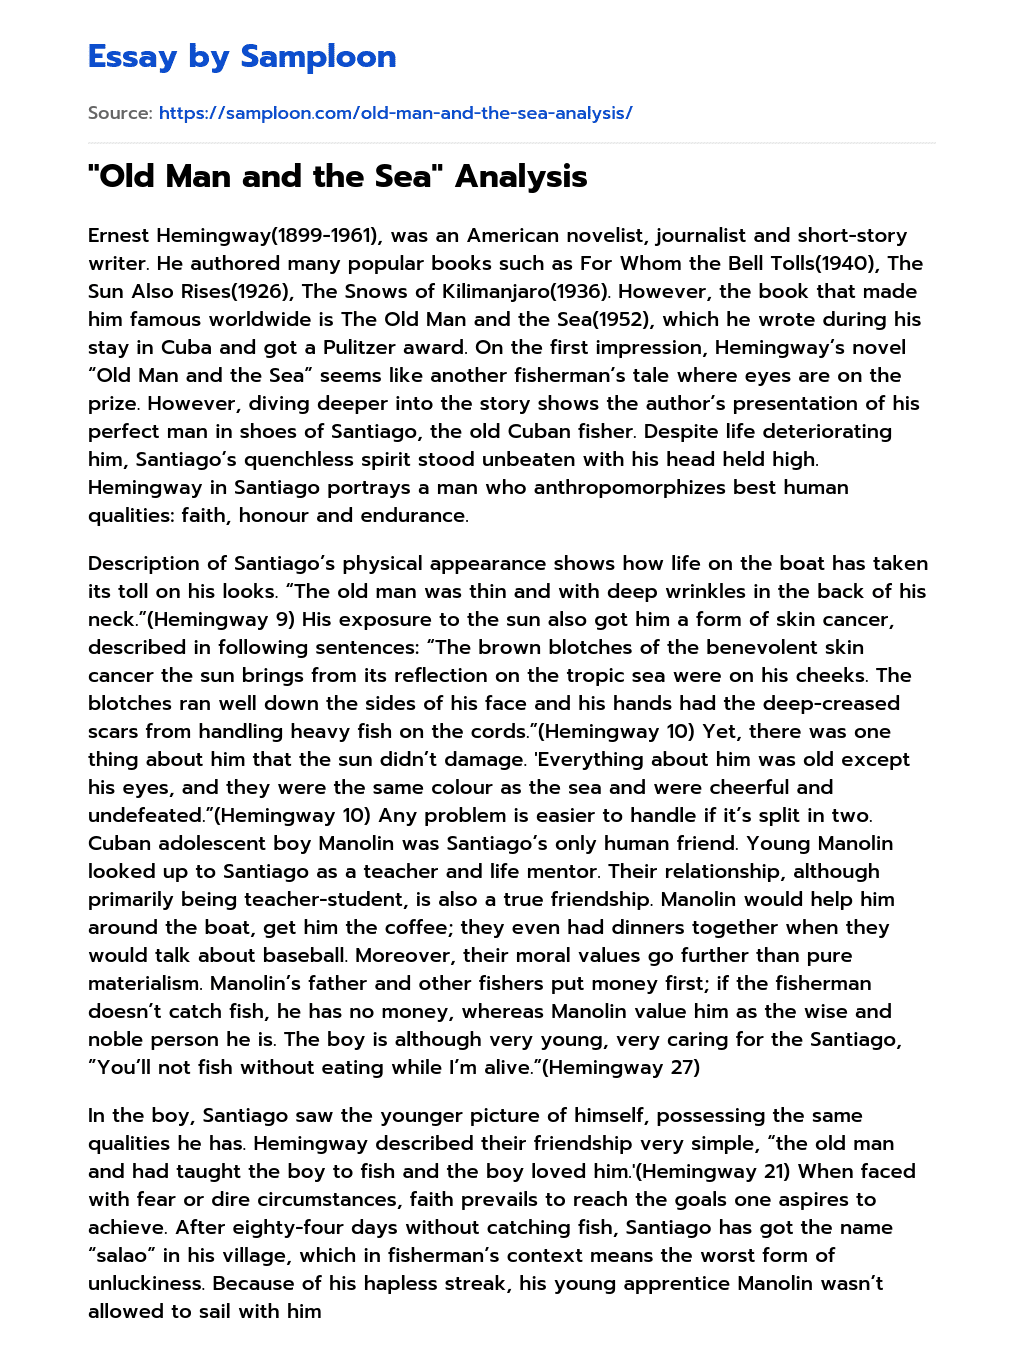 “Old Man and the Sea” Analysis essay